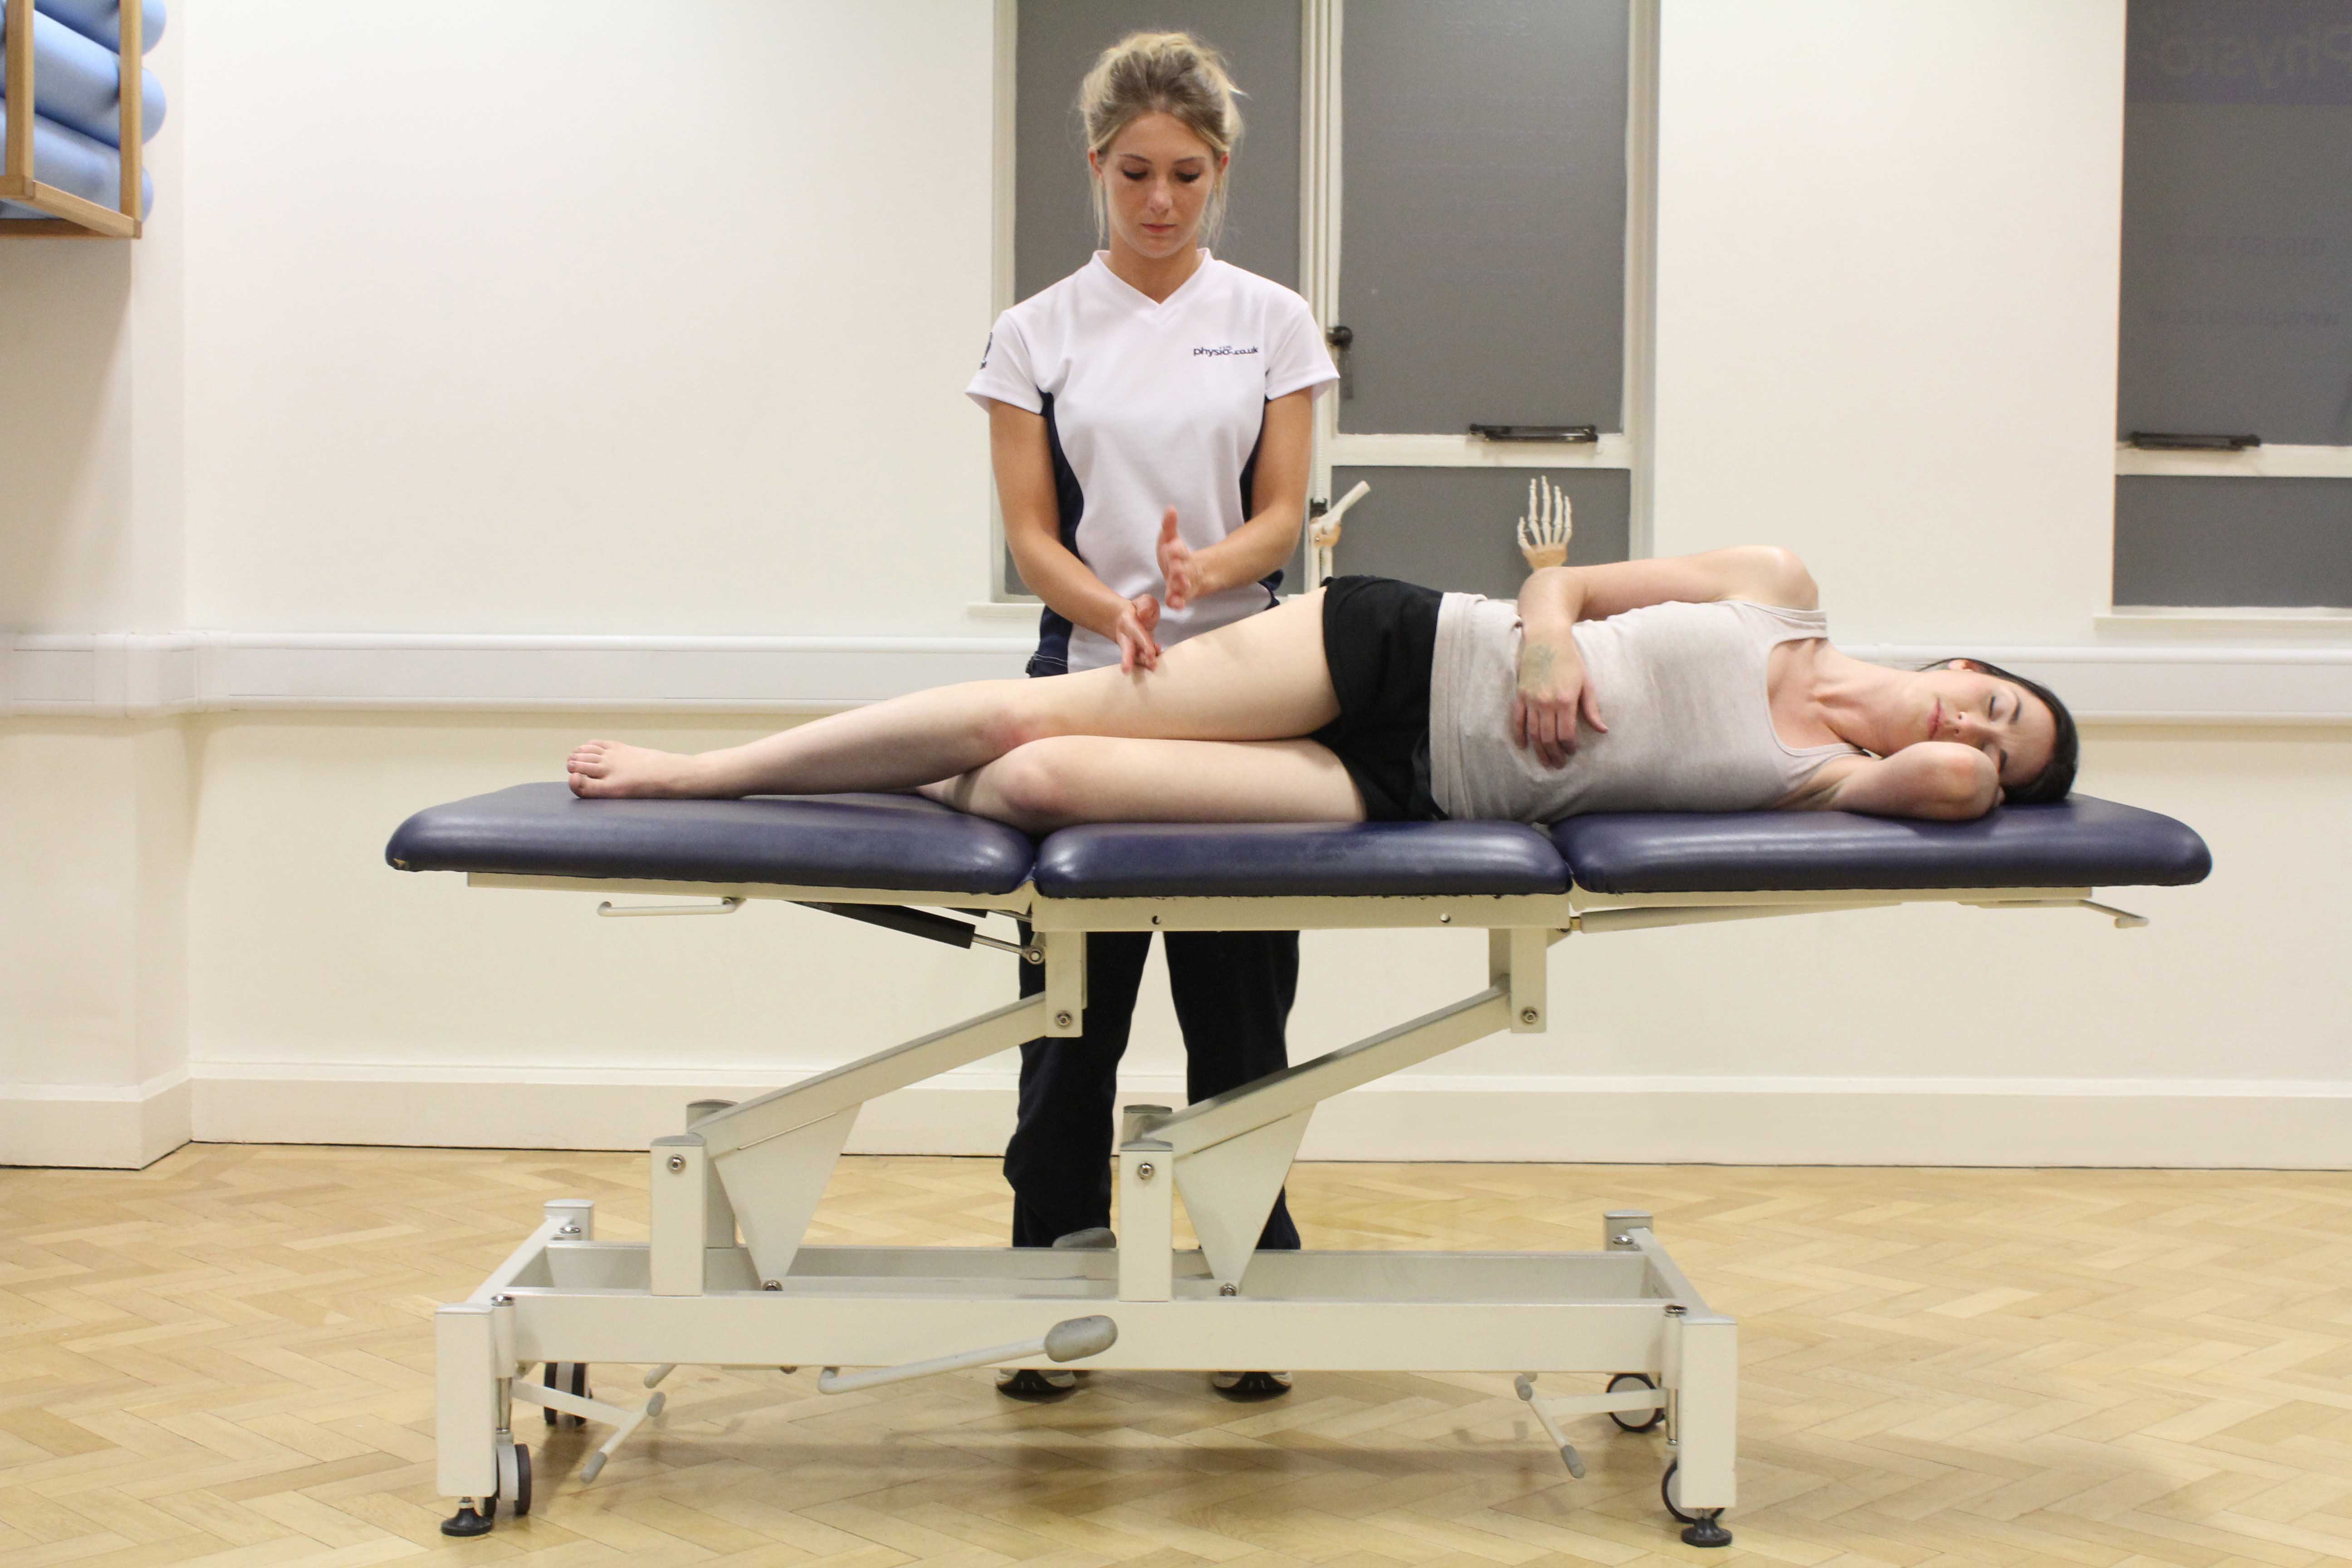 Beating percussion massage technique applied to rectus femoris muscle